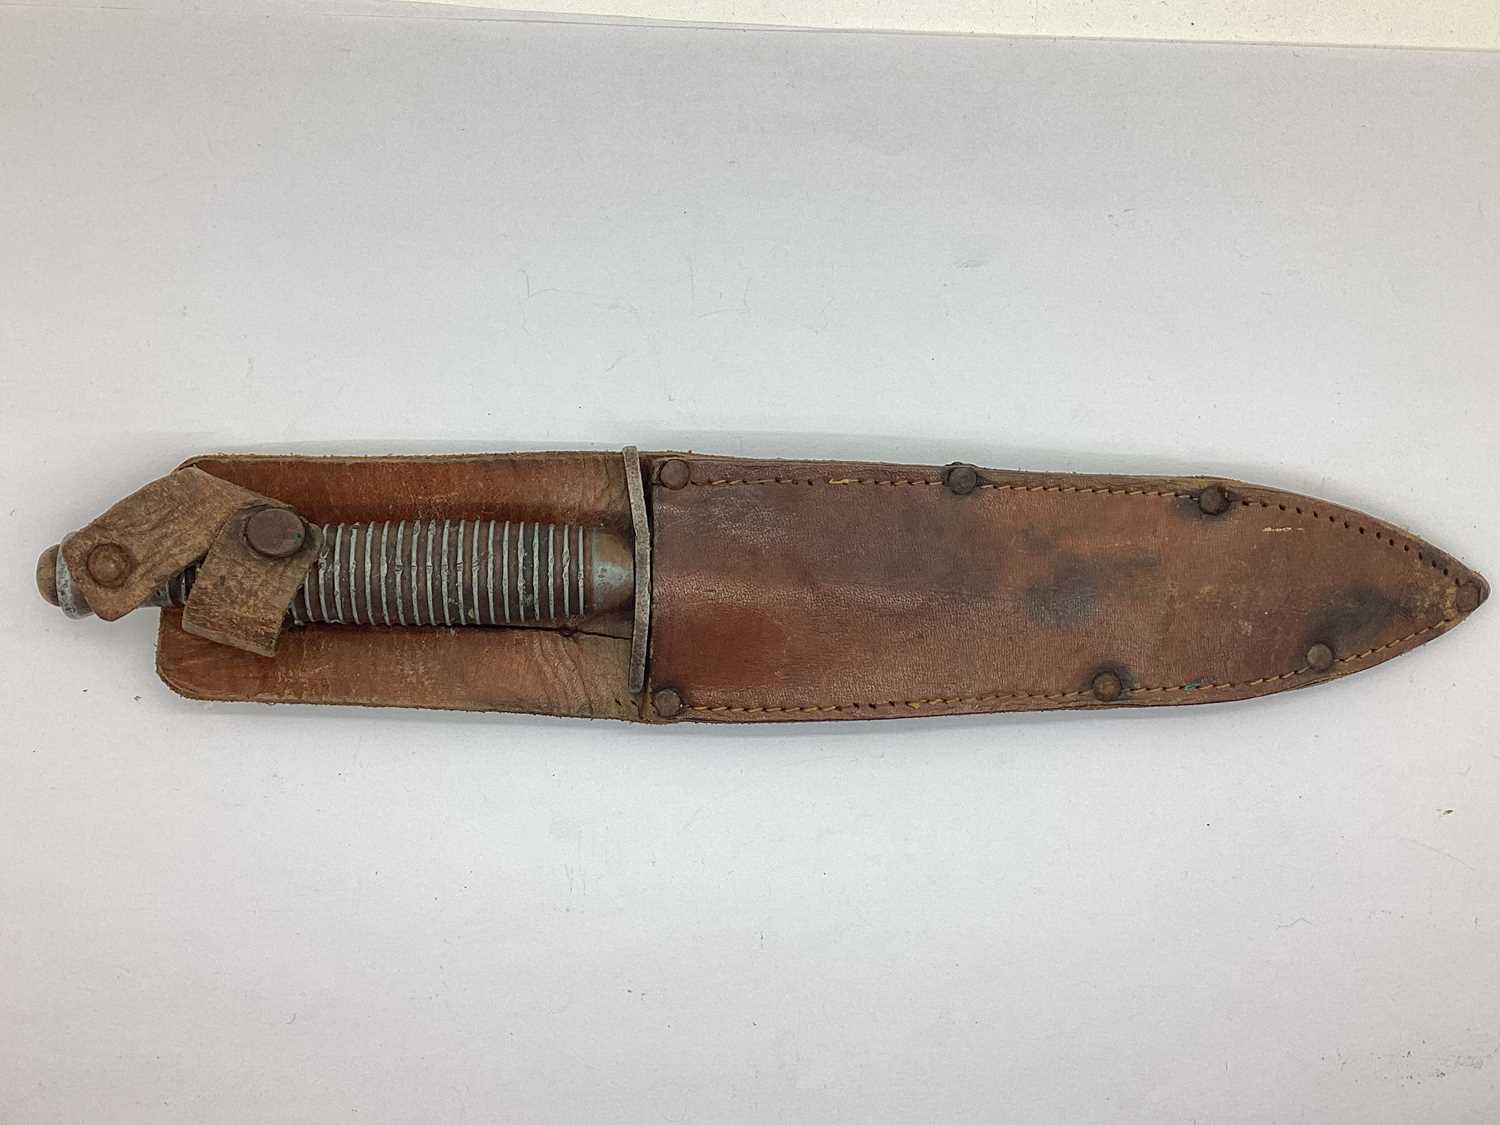 Fairbairn Sykes 3rd Pattern Fighting Knife with Non Standard Sheath, marked with number '4' on - Image 2 of 2